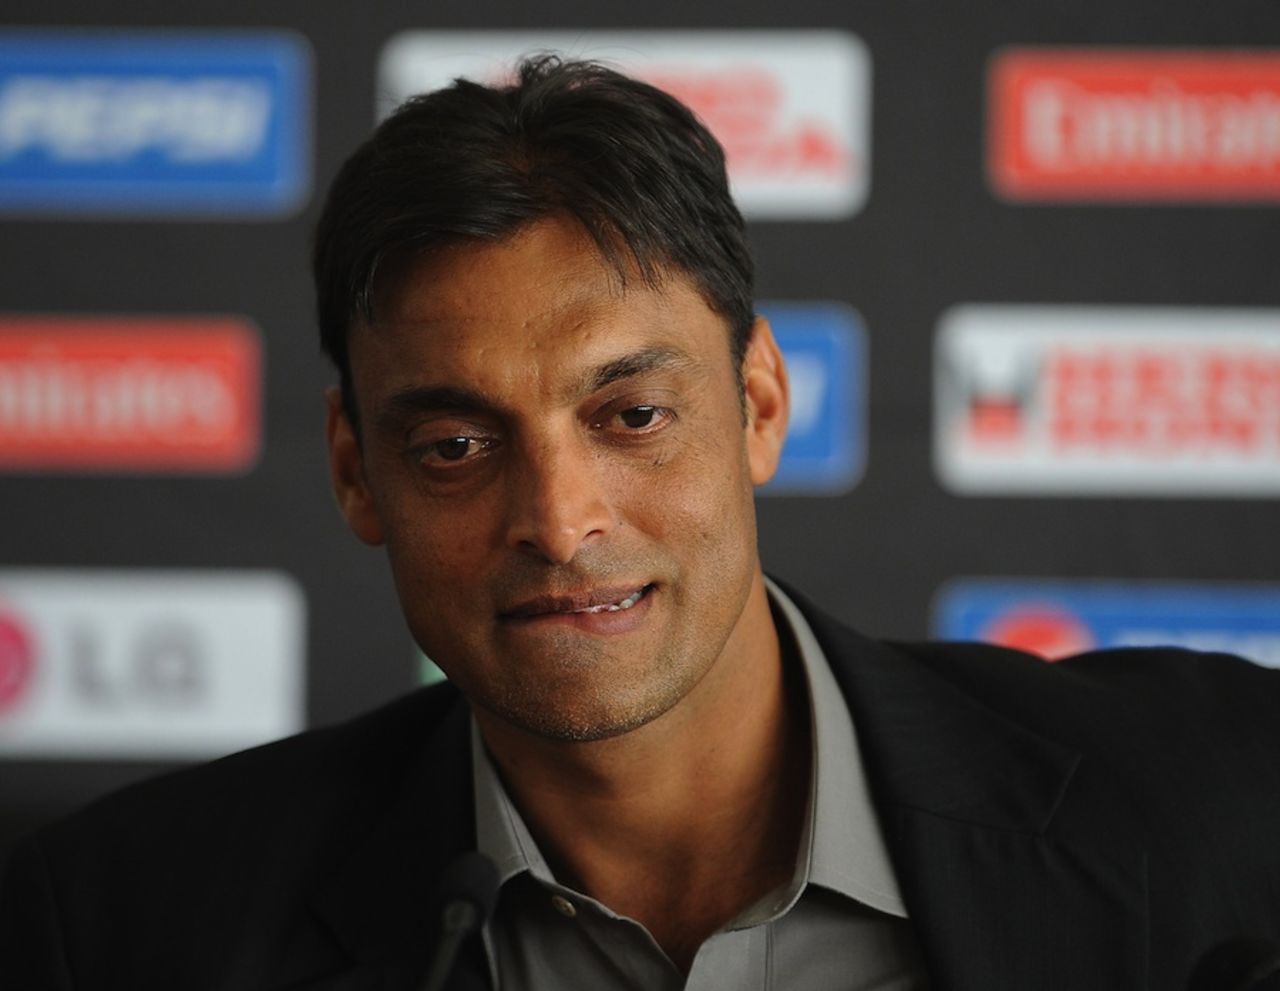 Shoaib Akhtar announces that he will retire after the World Cup, Colombo, March 17, 2011